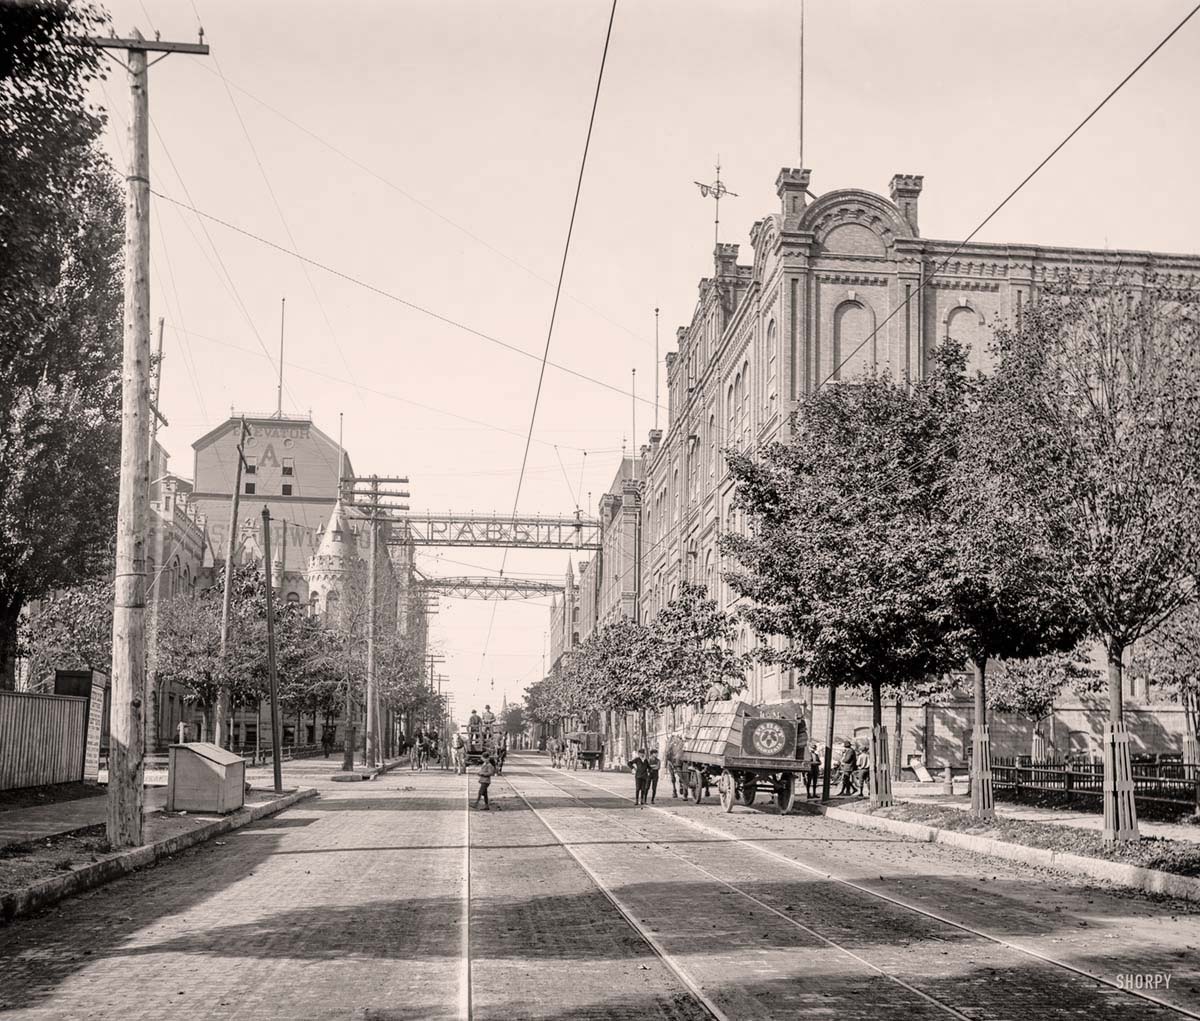 Milwaukee, Wisconsin. Pabst brewery, Avenue of the Beer-Wagons, circa 1900